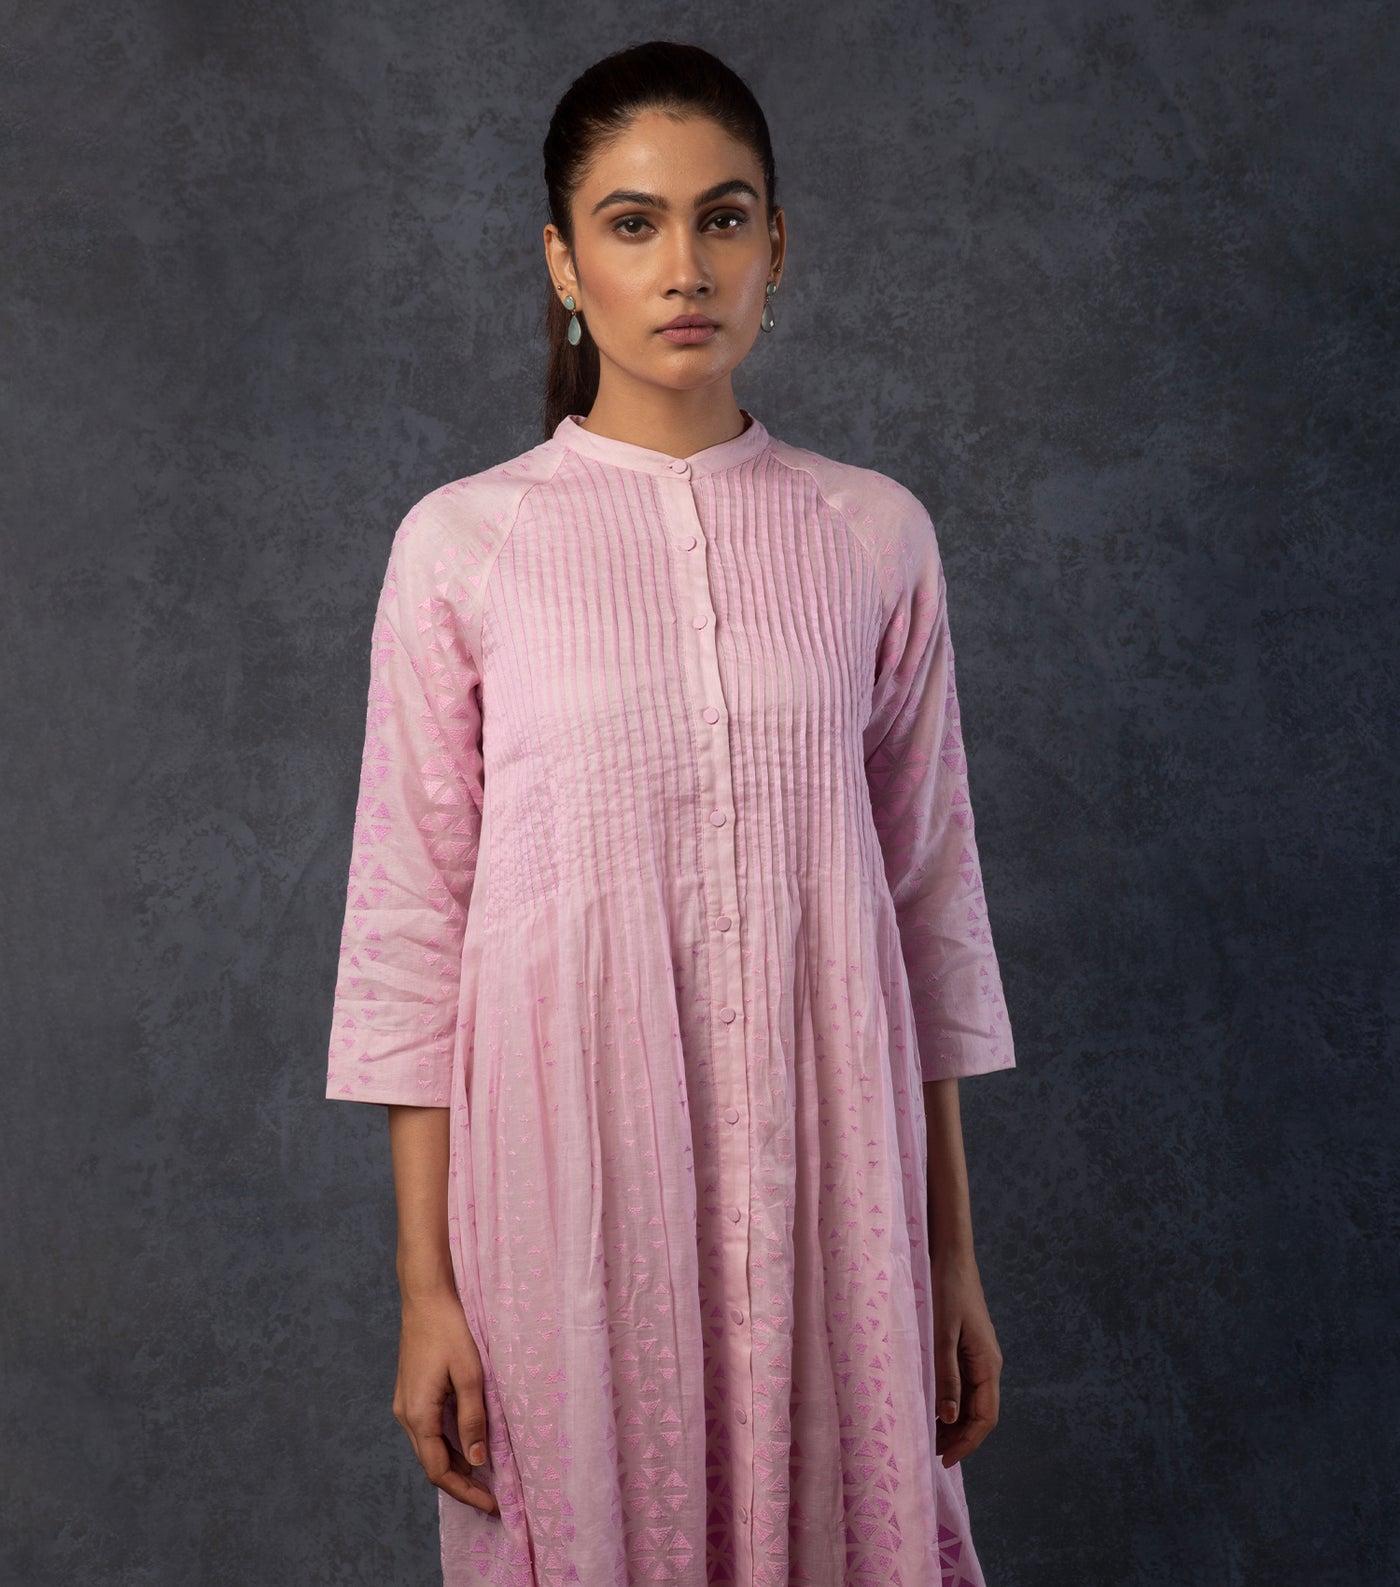 Light Pink Embroidered Cotton Dress